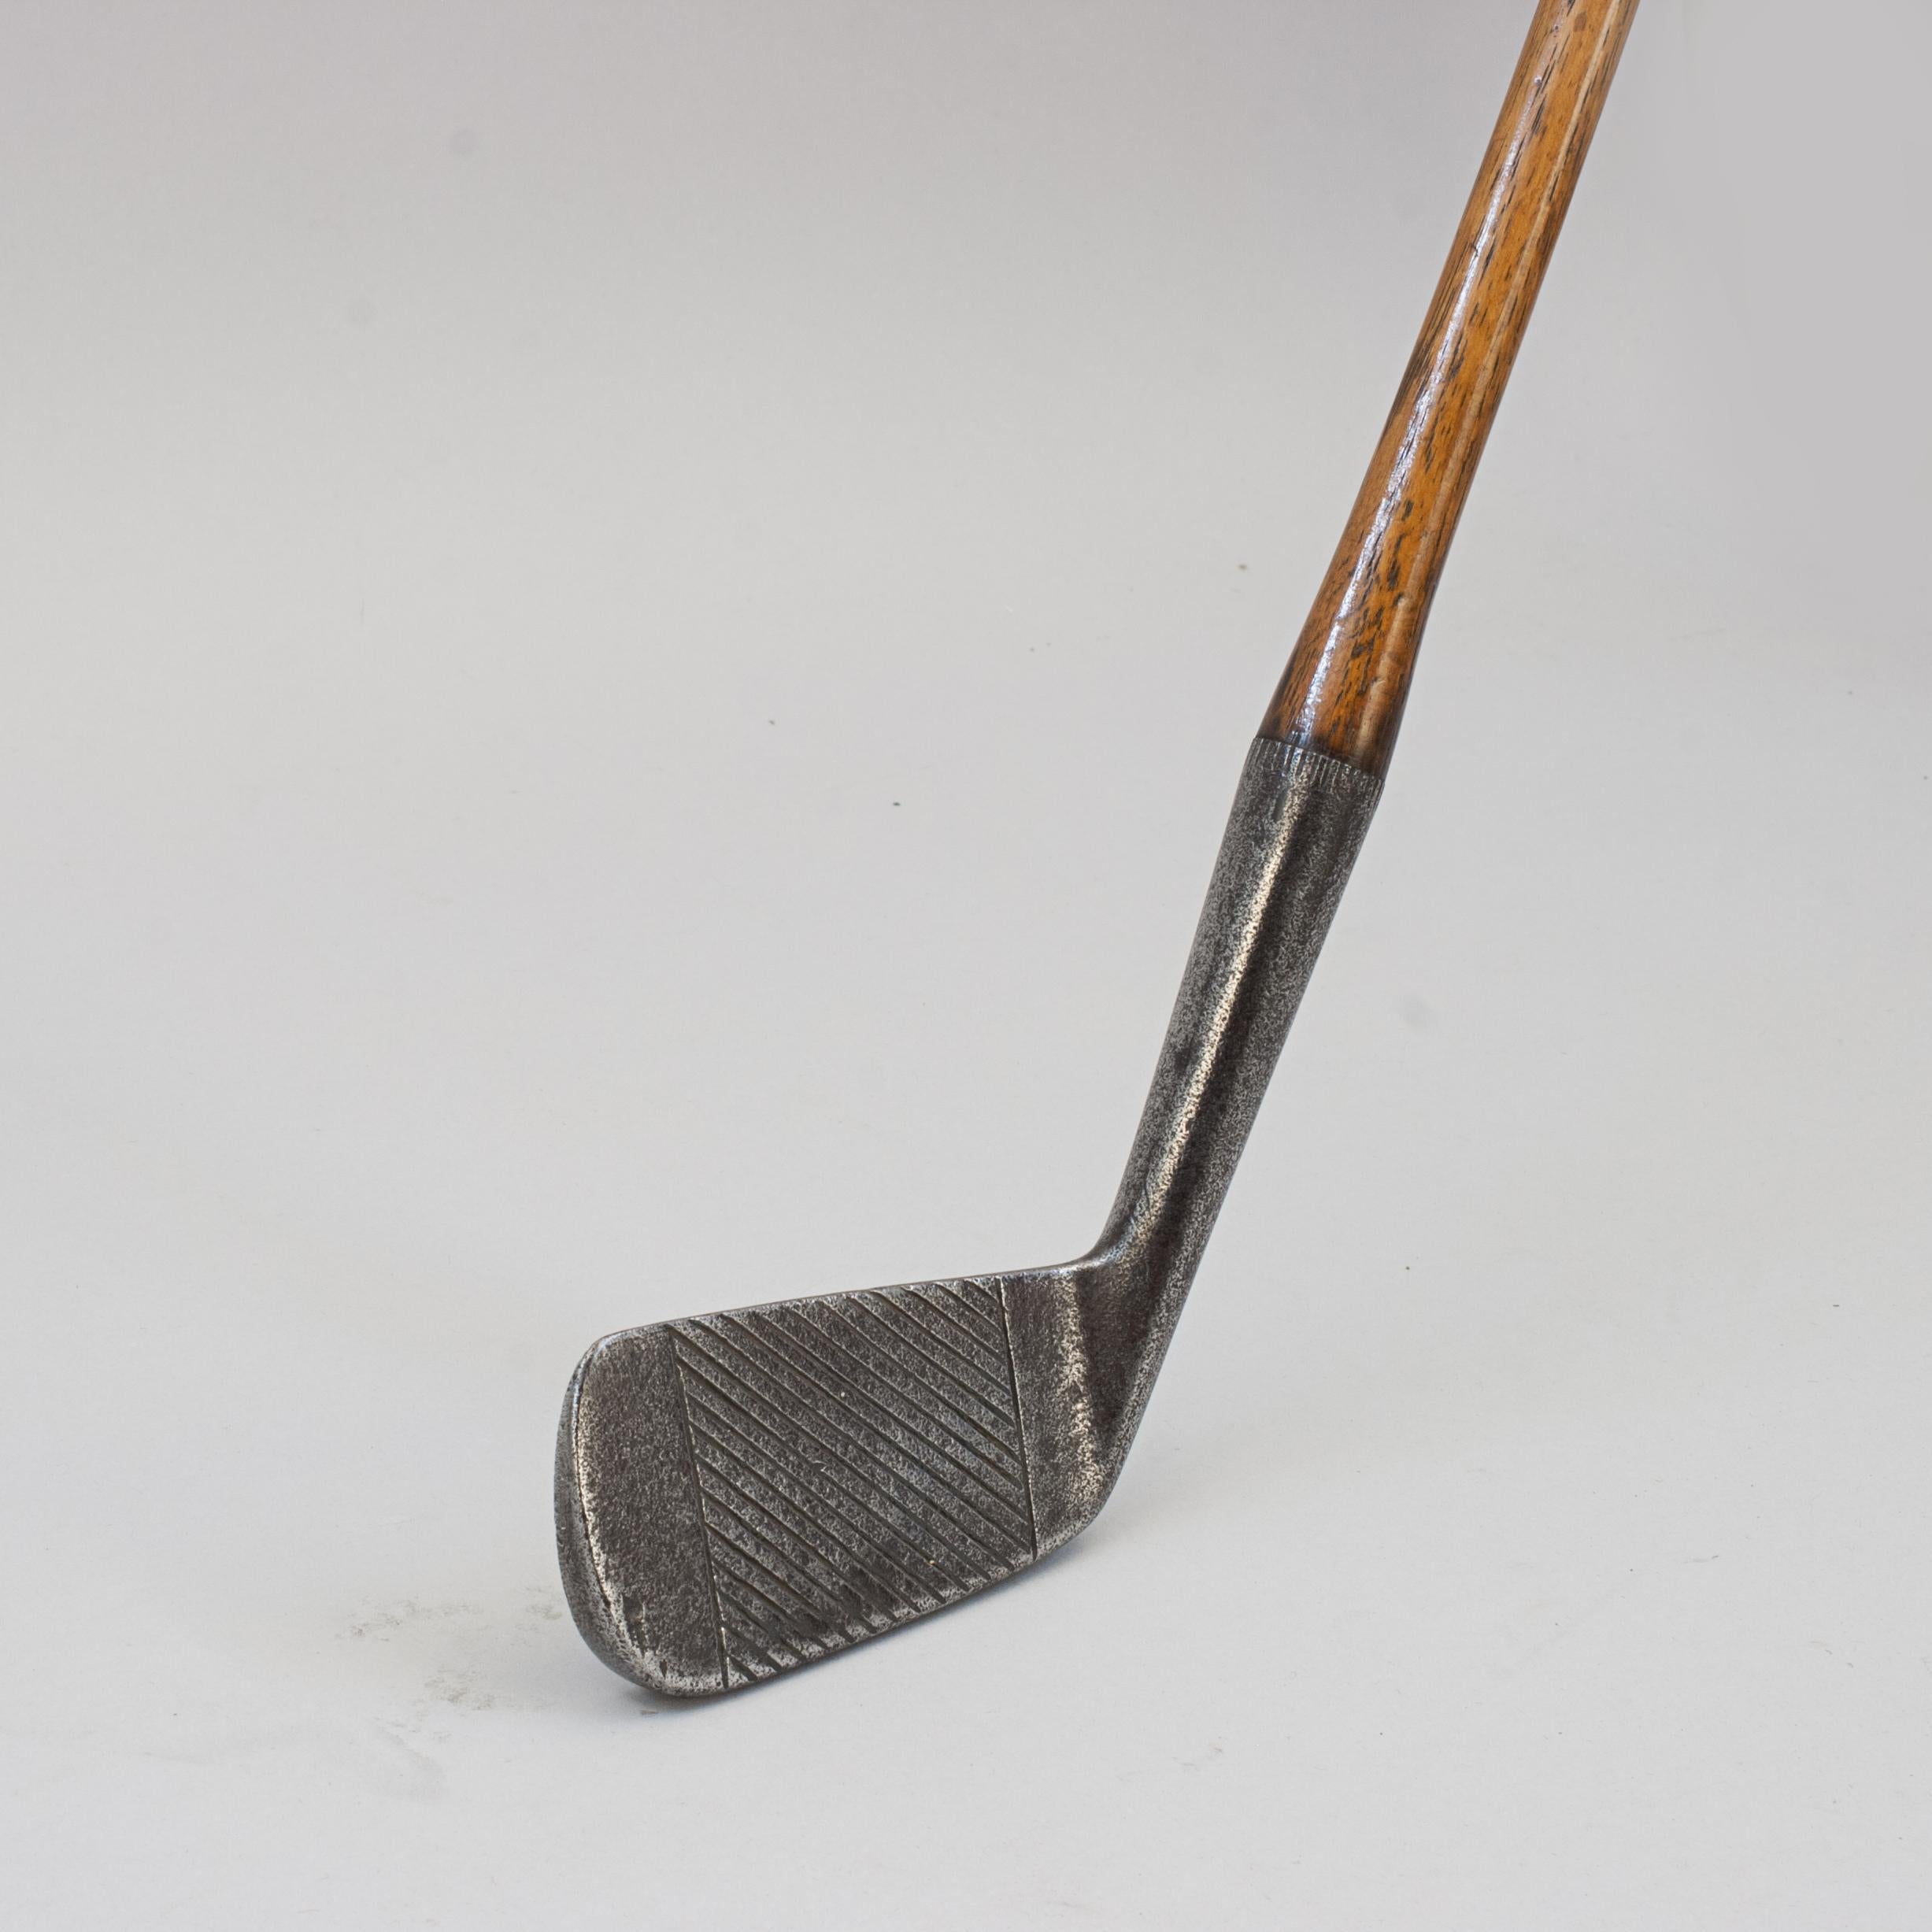 Unusual Deep Face Golf Club By Gibson Of Kinghorn.
Hickory golf club iron by William Gibson, Fife. The deep face iron with diagonal line face markings, the rear of the club head is with the 'Out Line Star' cleek mark of Gibson with the words